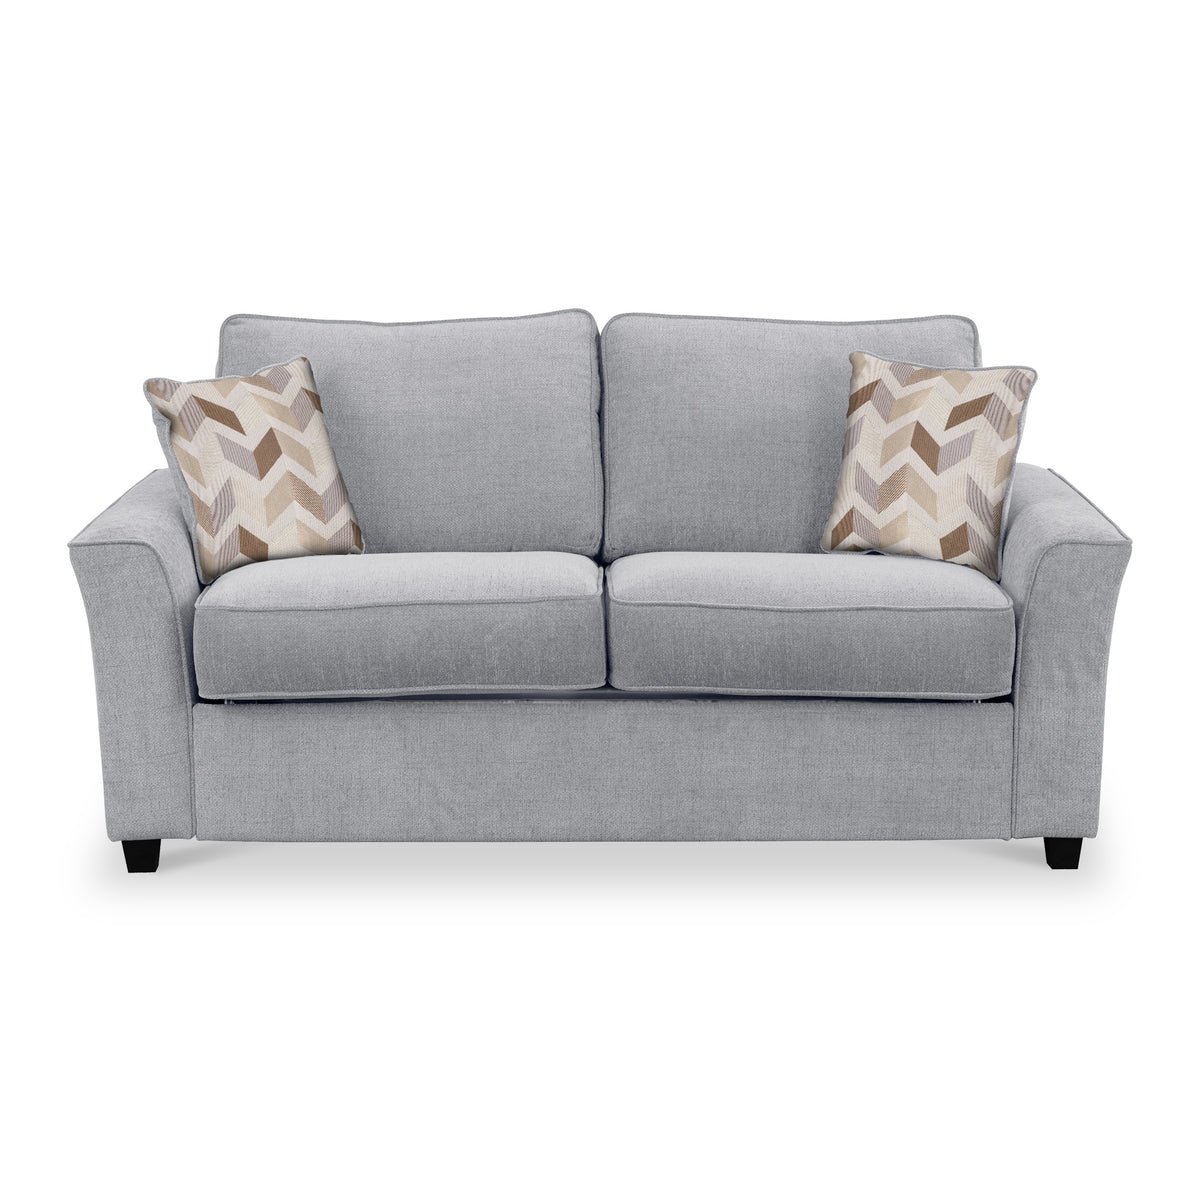 Abbott 2 Seater Sofabed in Silver with Morelisa Beige Cushions by Roseland Furniture